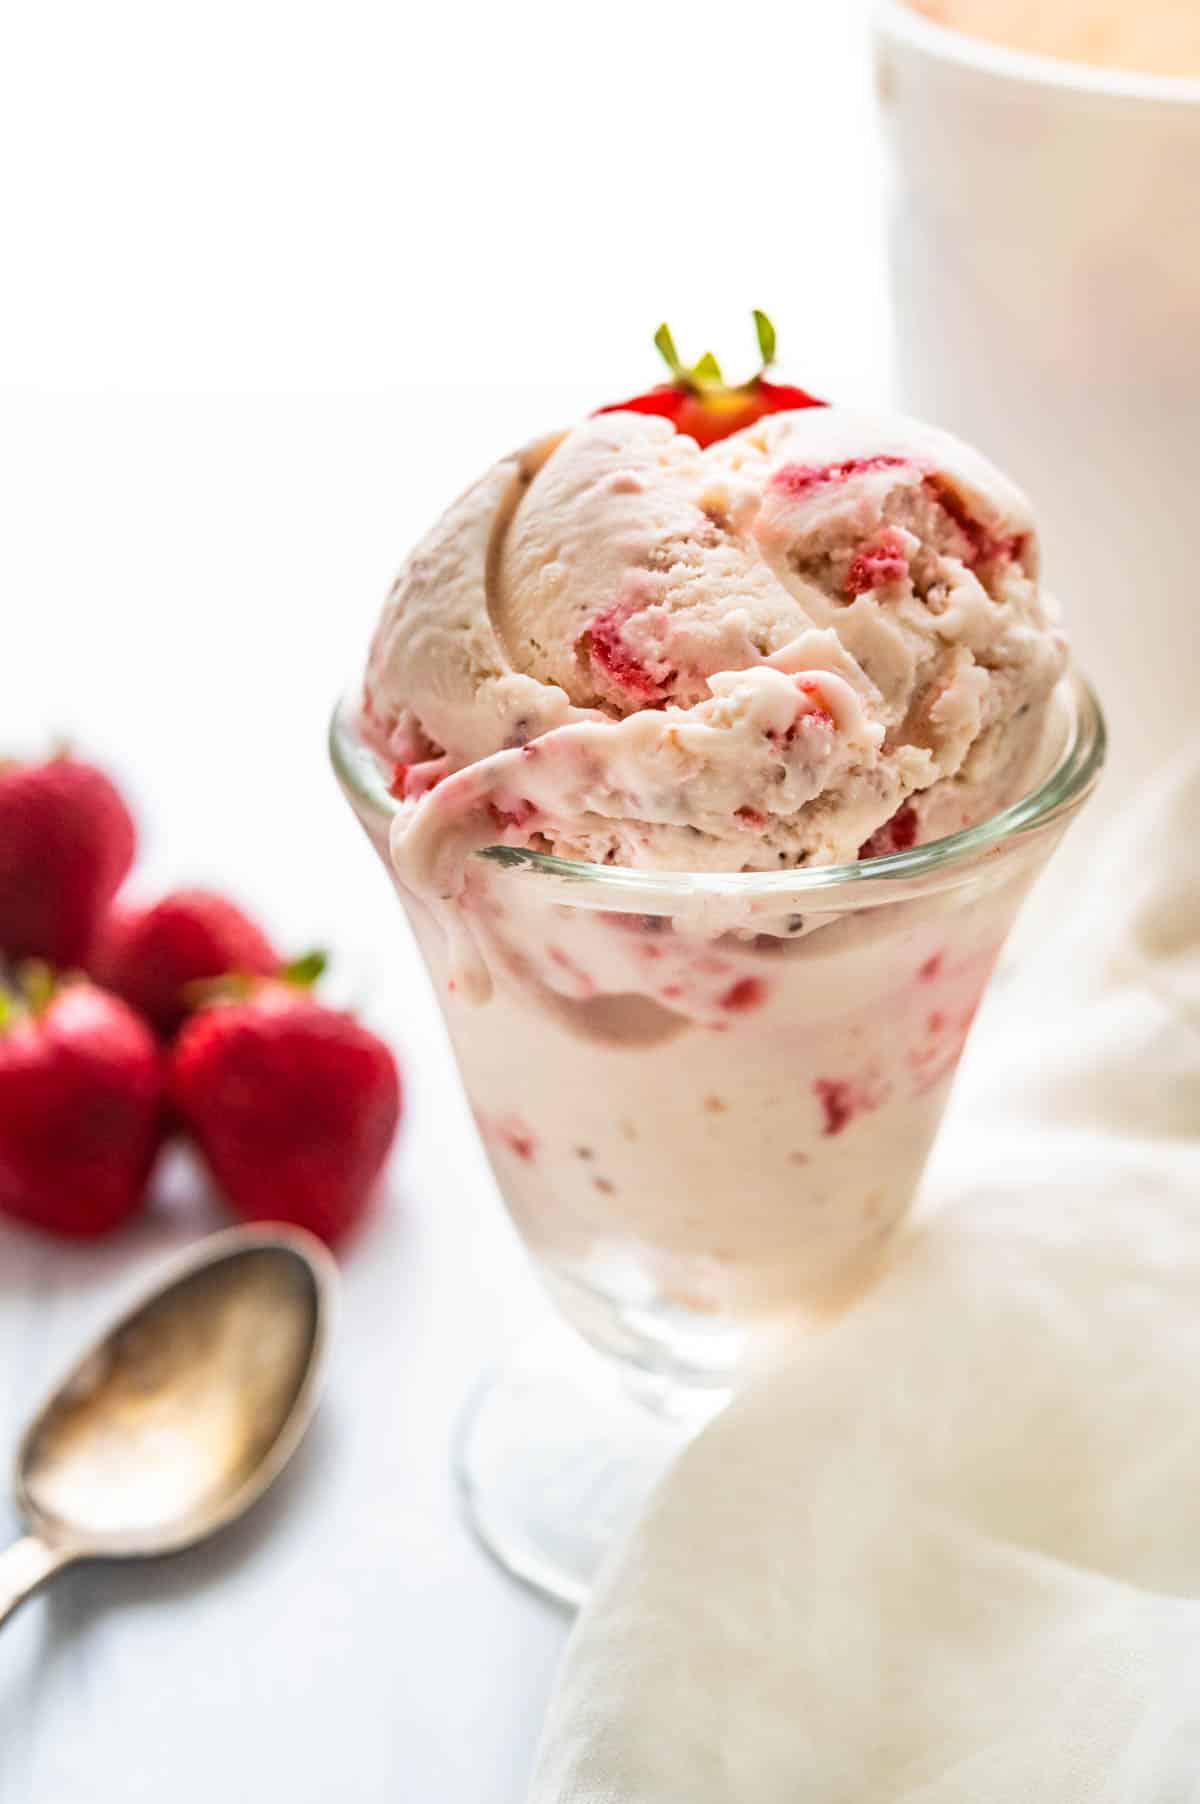 Serving a dish of strawberry ice cream.